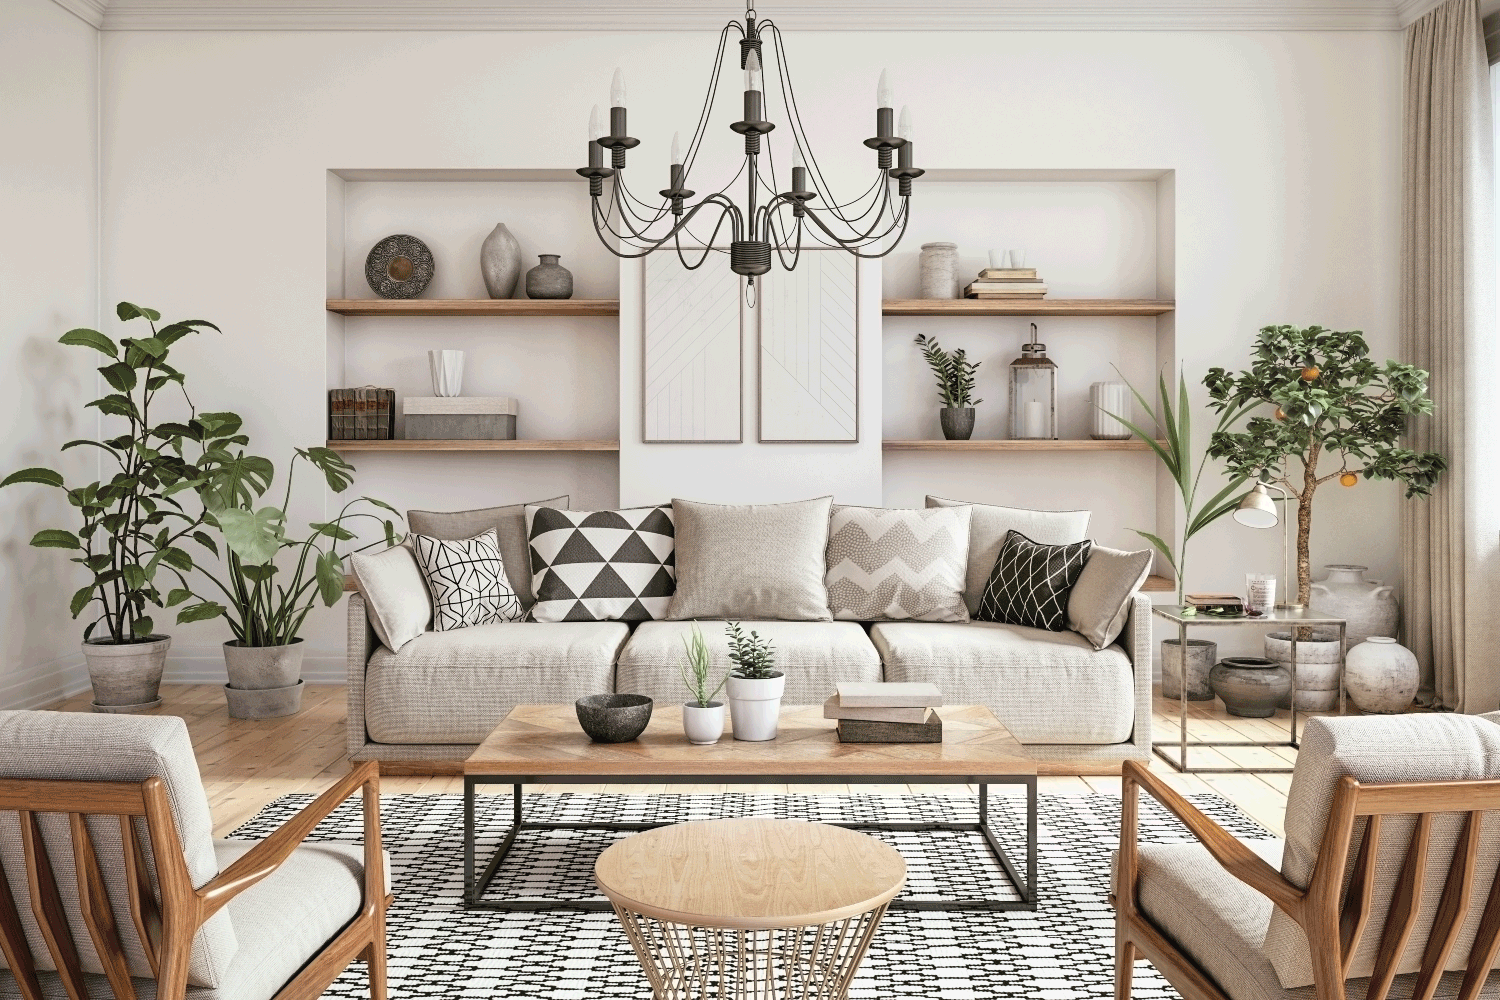 Scandinavian interior design living room with beige colored furniture, wooden elements, black accents